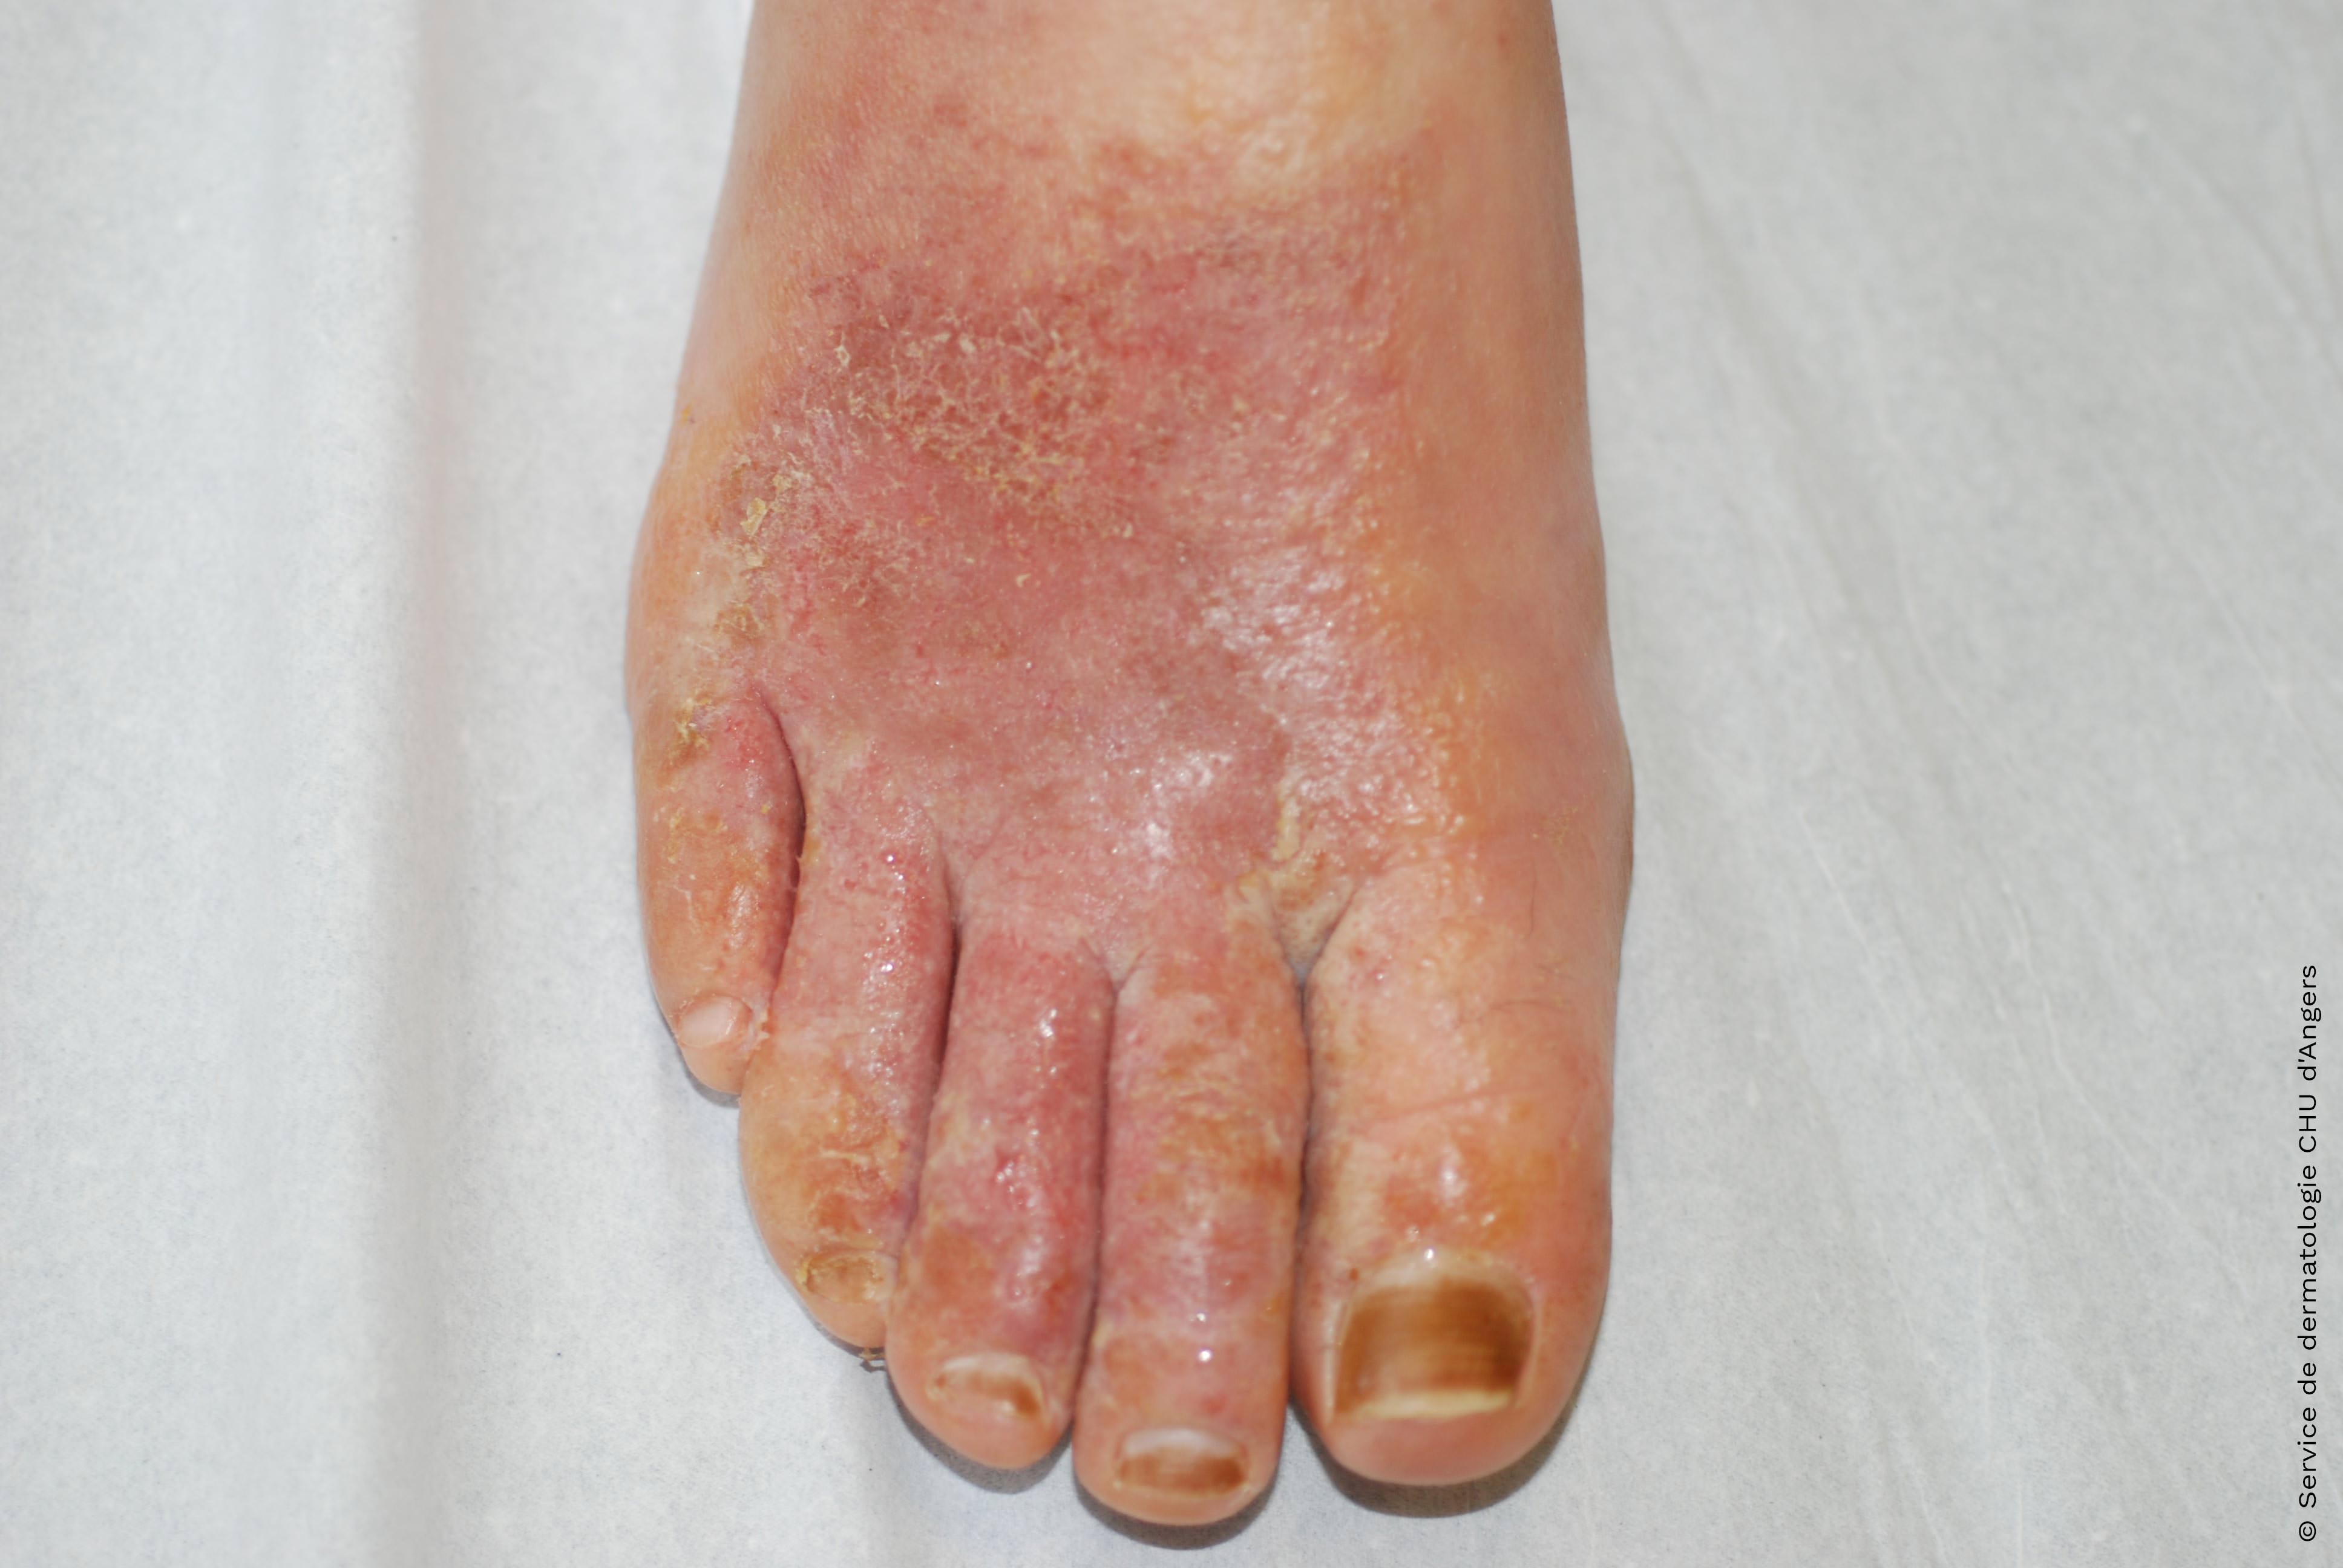 Acute contact eczema of the foot with tea tree oil